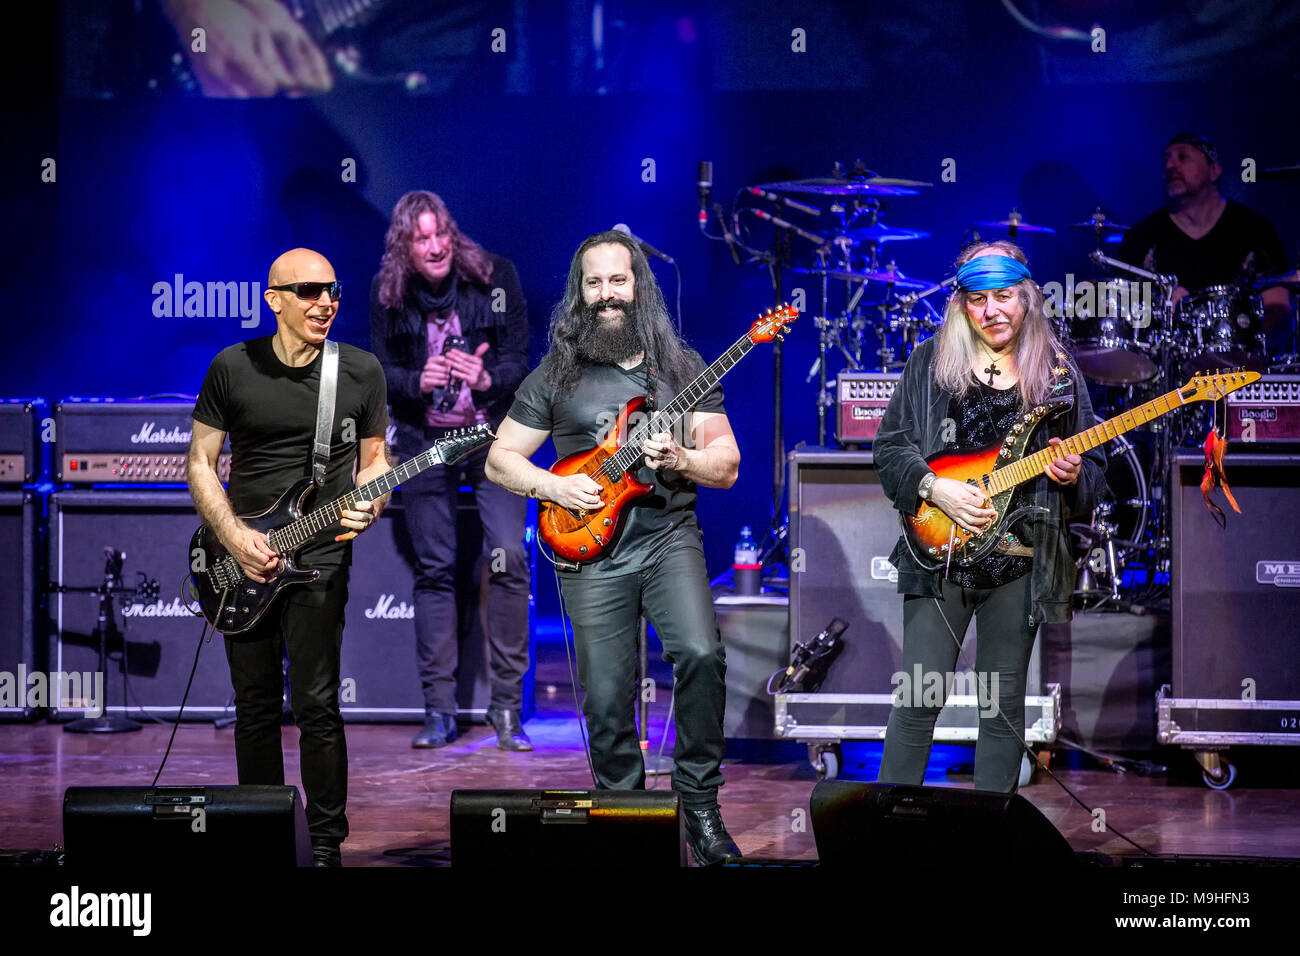 Norway, Oslo - March 24, 2018. The G3 guitar concert tour has reached Oslo Konserthus. Here guitarists Joe Satriani (L), John Petrucci (C) and Uli Jon Roth (R) are seen live on stage. (Photo credit: Gonzales Photo - Terje Dokken). Stock Photo